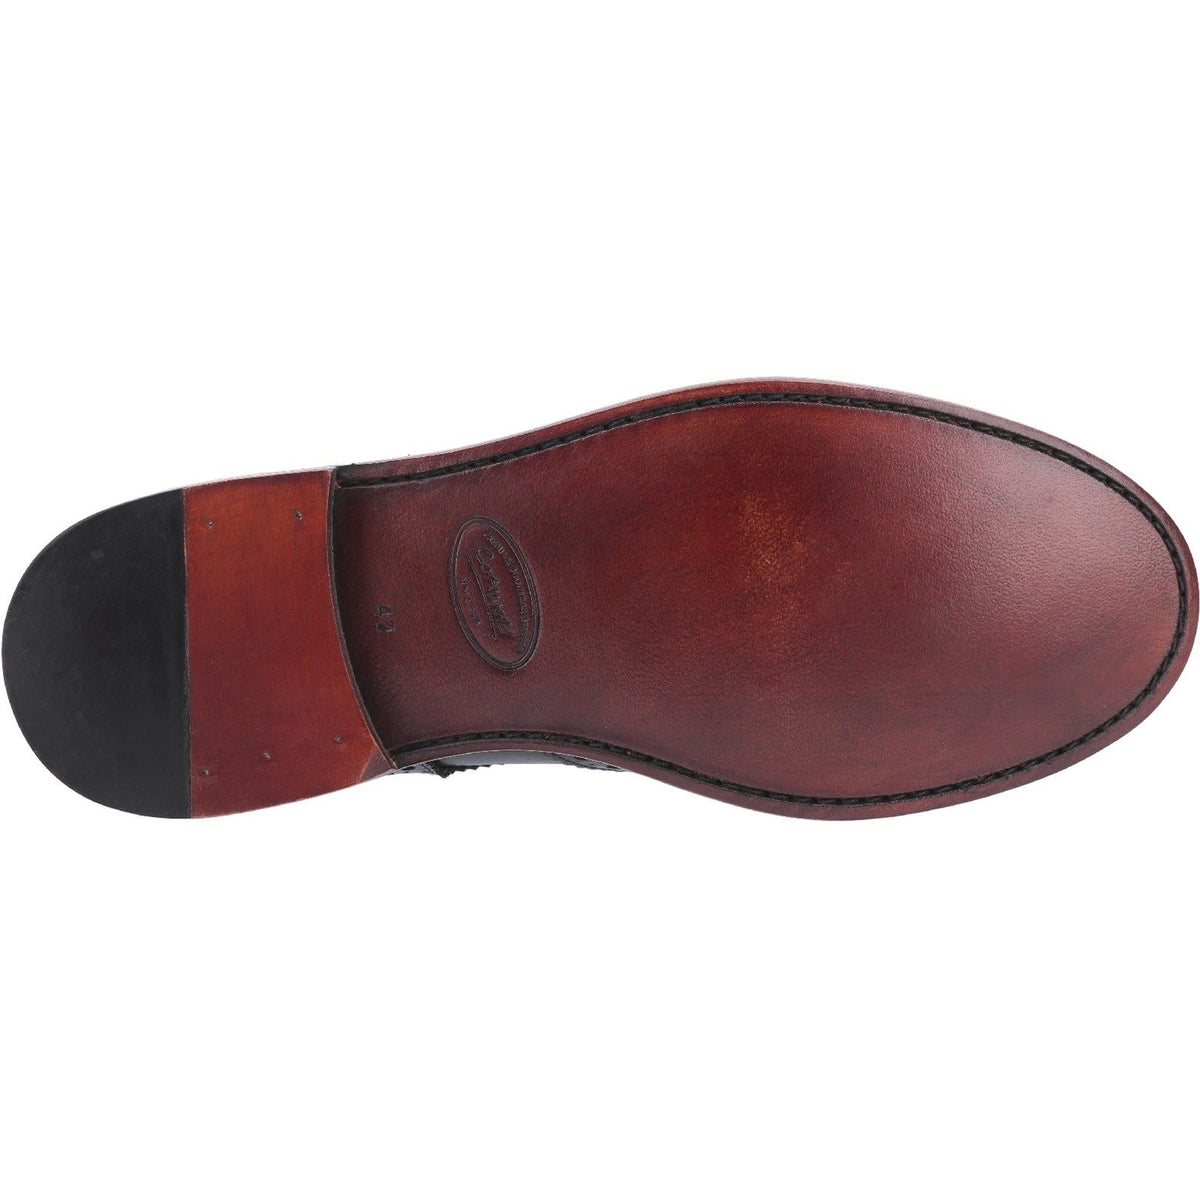 Cotswold Quenington Leather Goodyear Welt Shoes